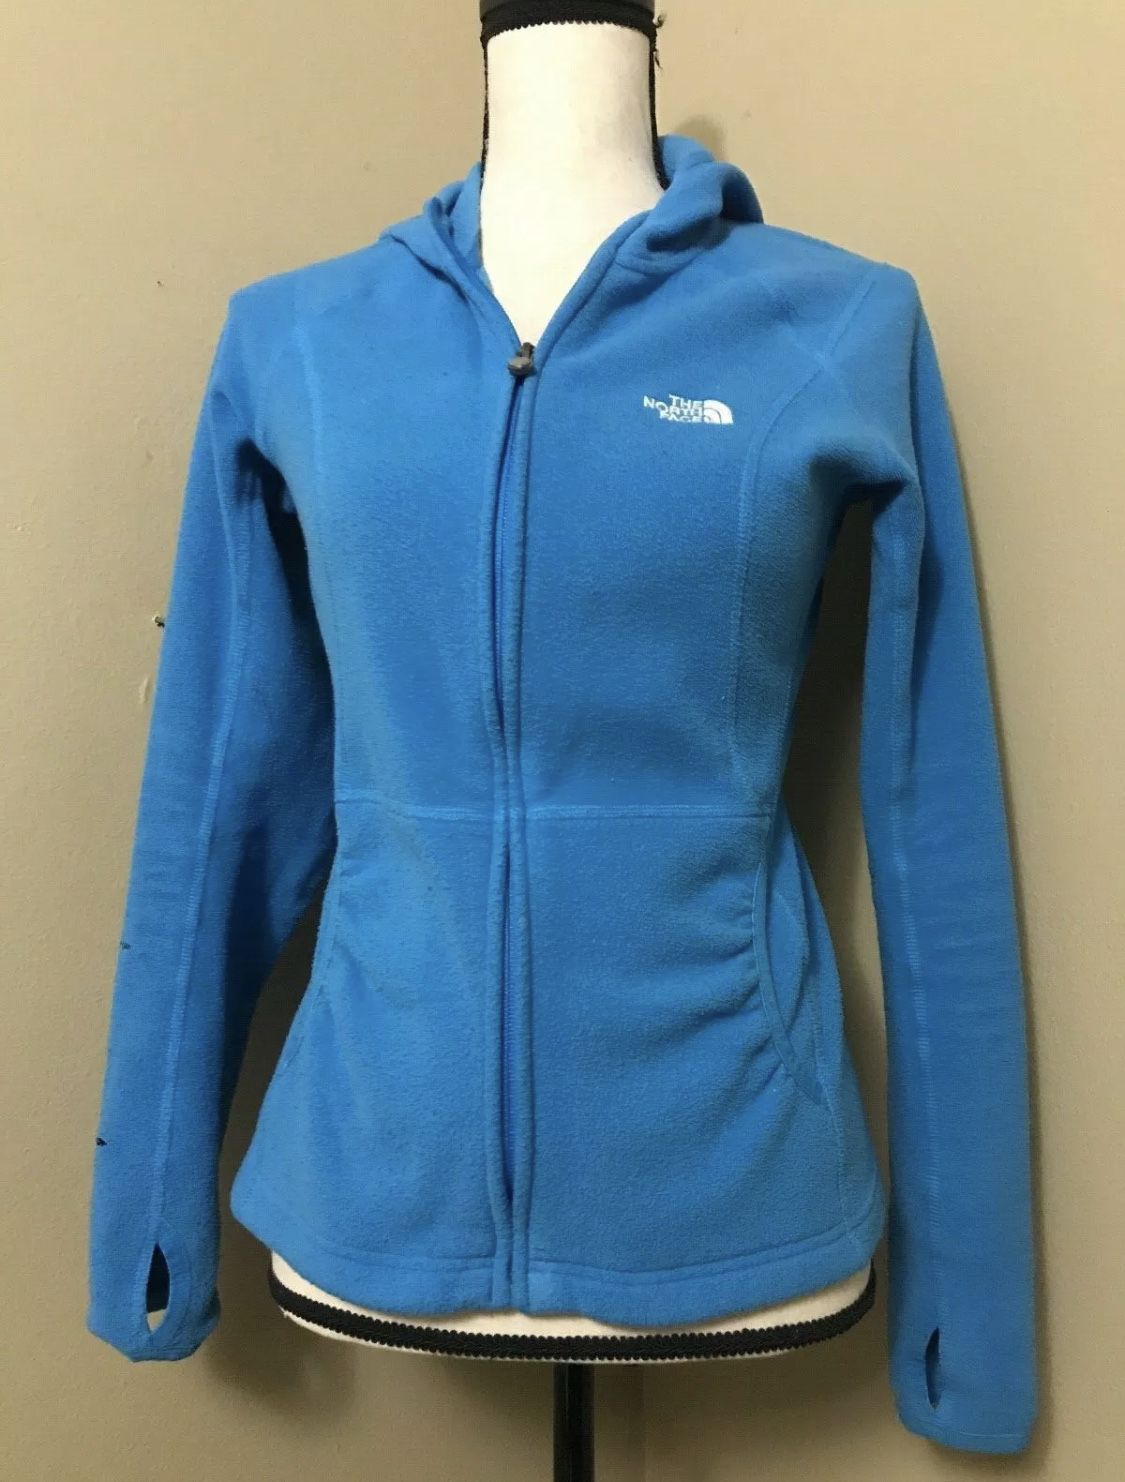 THE NORTH FACE Polartec Turquoise Blue Hooded Fleece Jacket Hoodie Womens Small